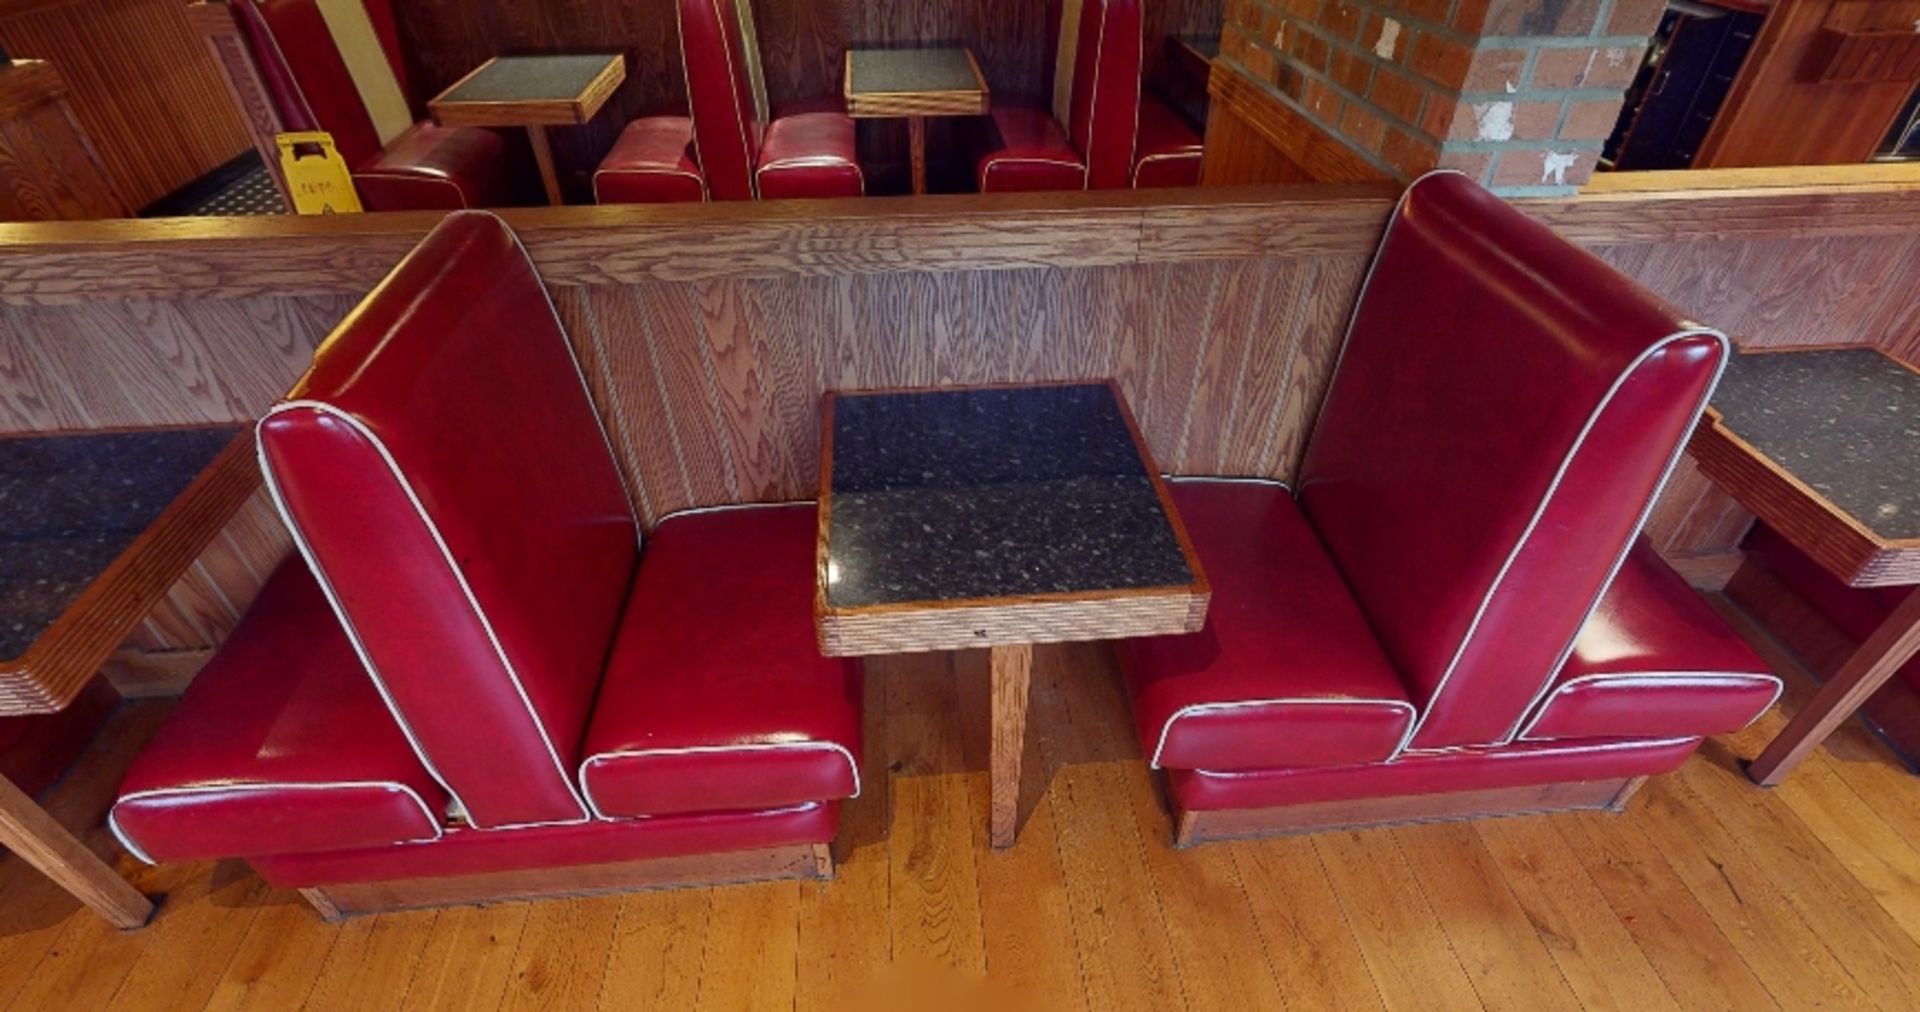 Selection of Single Seating Benches and Dining Tables to Seat Upto 8 Persons - Retro - 1950's - Image 6 of 9